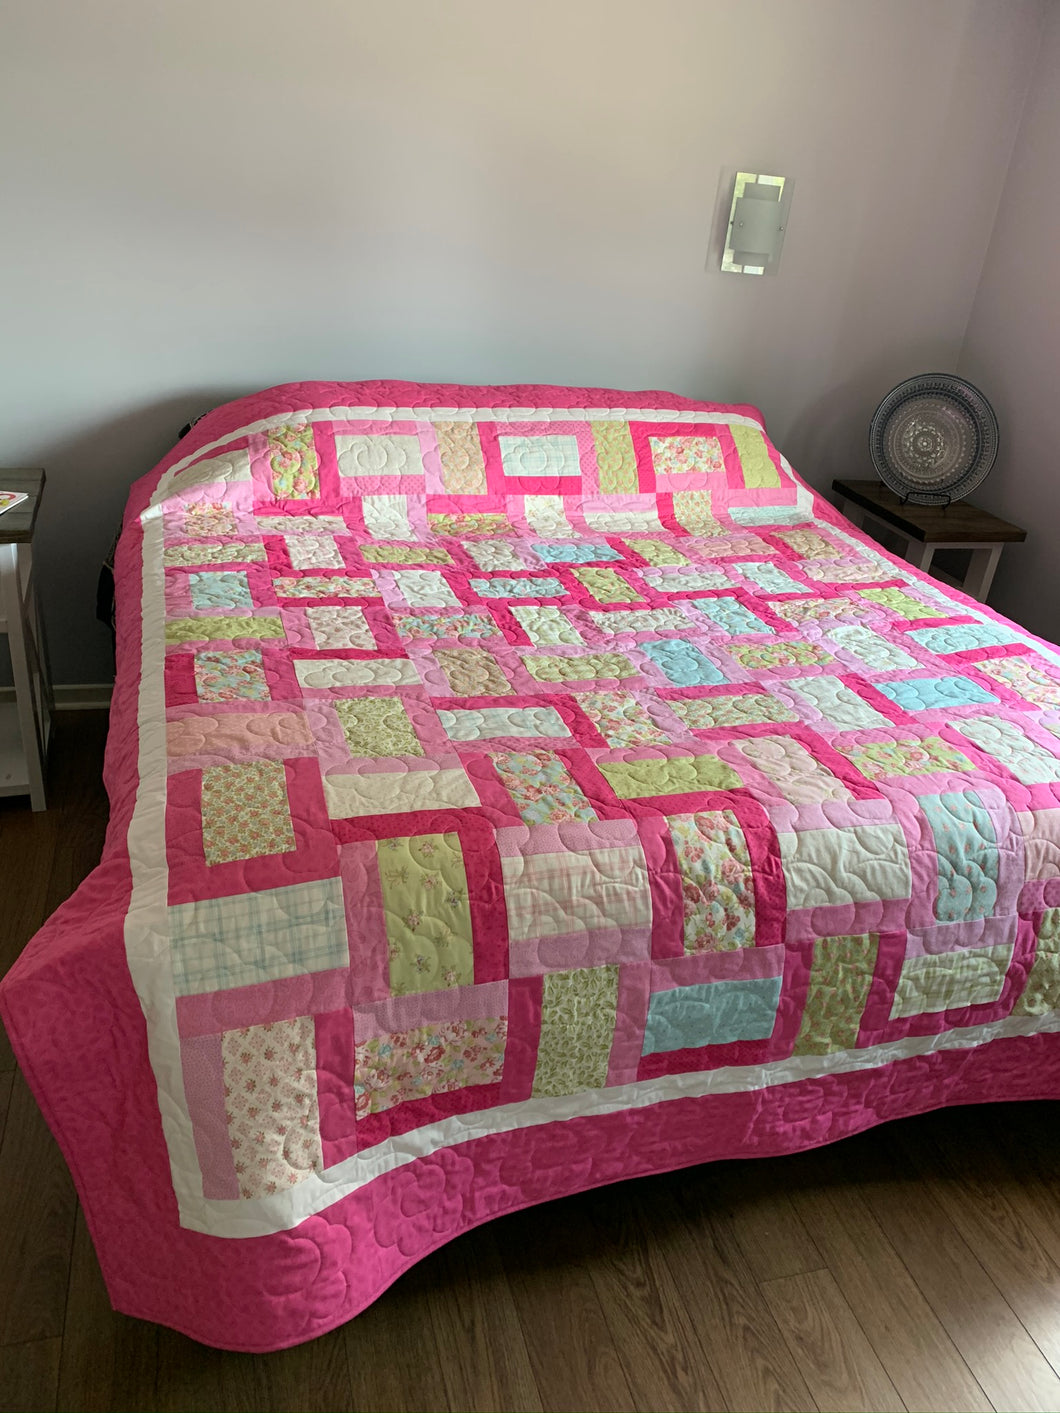 QUILT, Handmade Amish Style Quality Quilt, One-of-a-Kind- Pinks, Greens & Robin Blue Queen/King Size